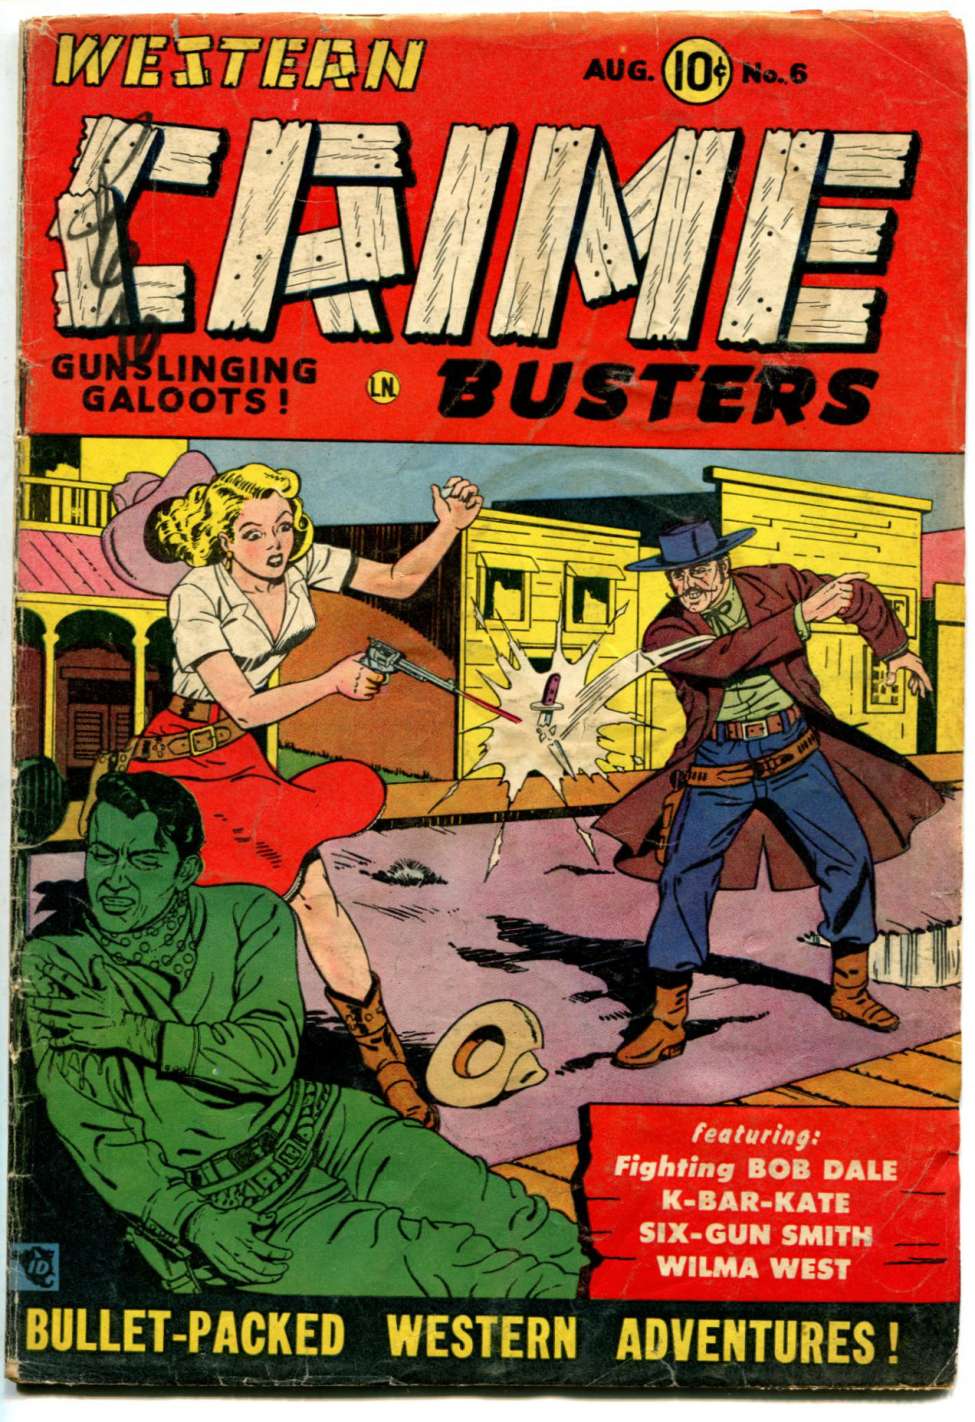 Comic Book Cover For Western Crime Busters 6